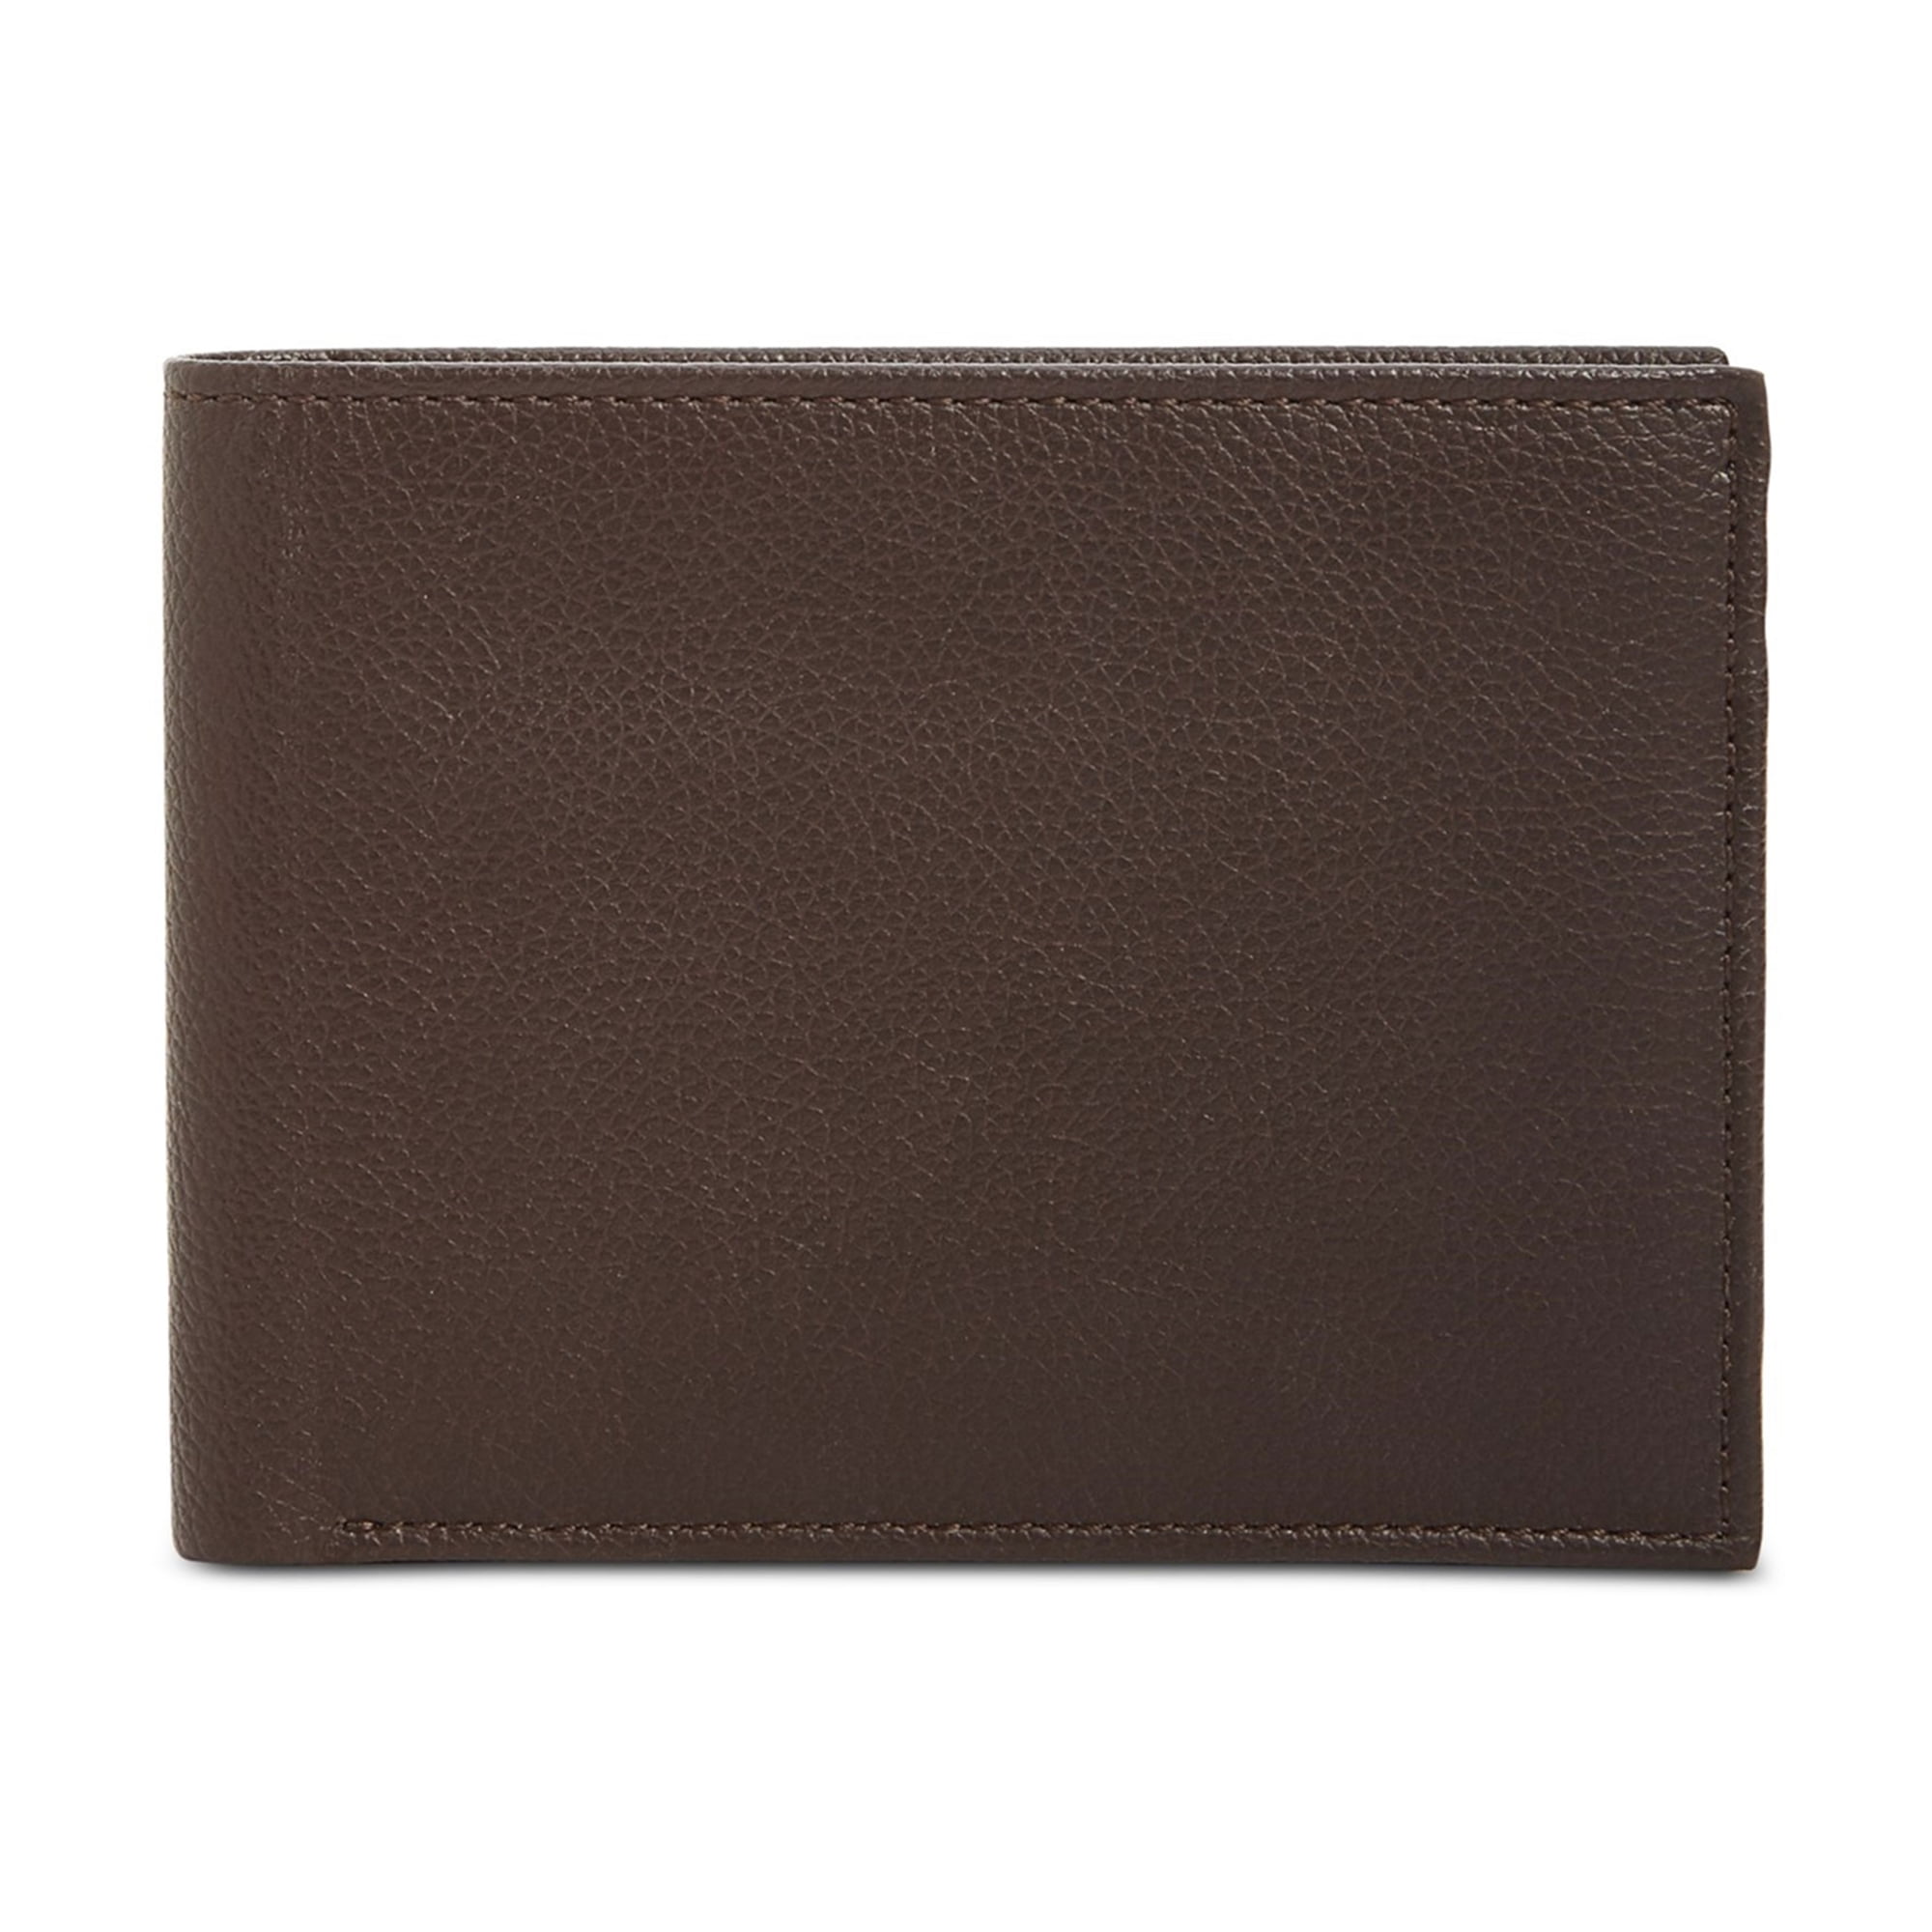 Perry Ellis America Trifold Genuine Leather Wallet-Brown